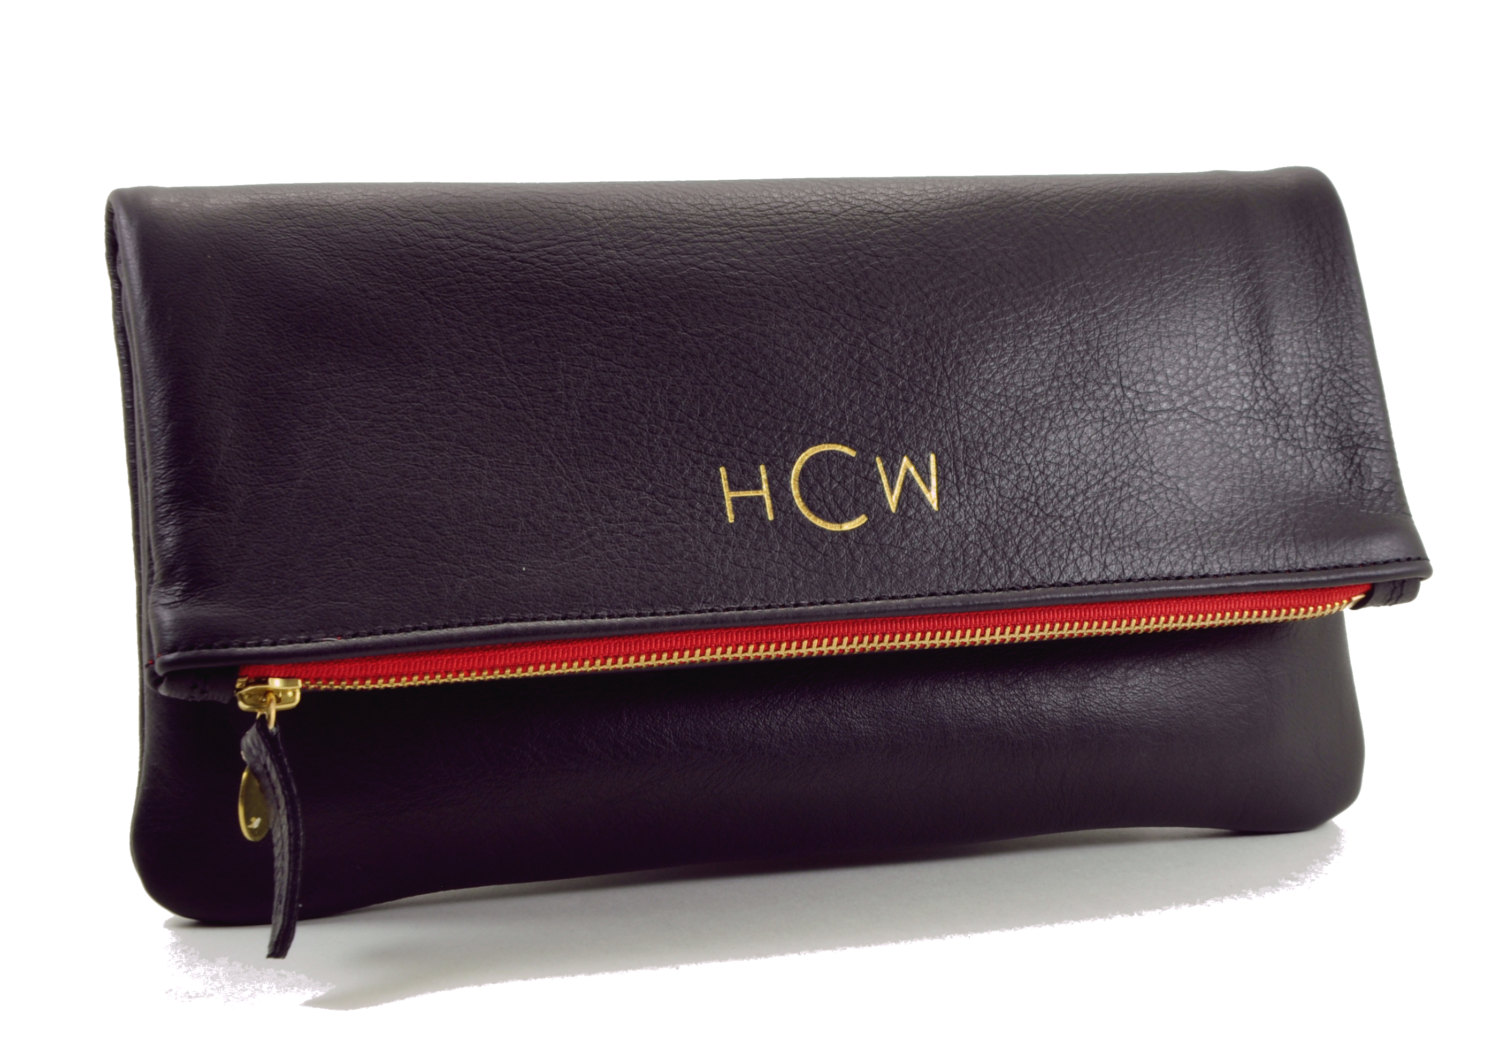 black foldover clutch with monogram in gold and red liner